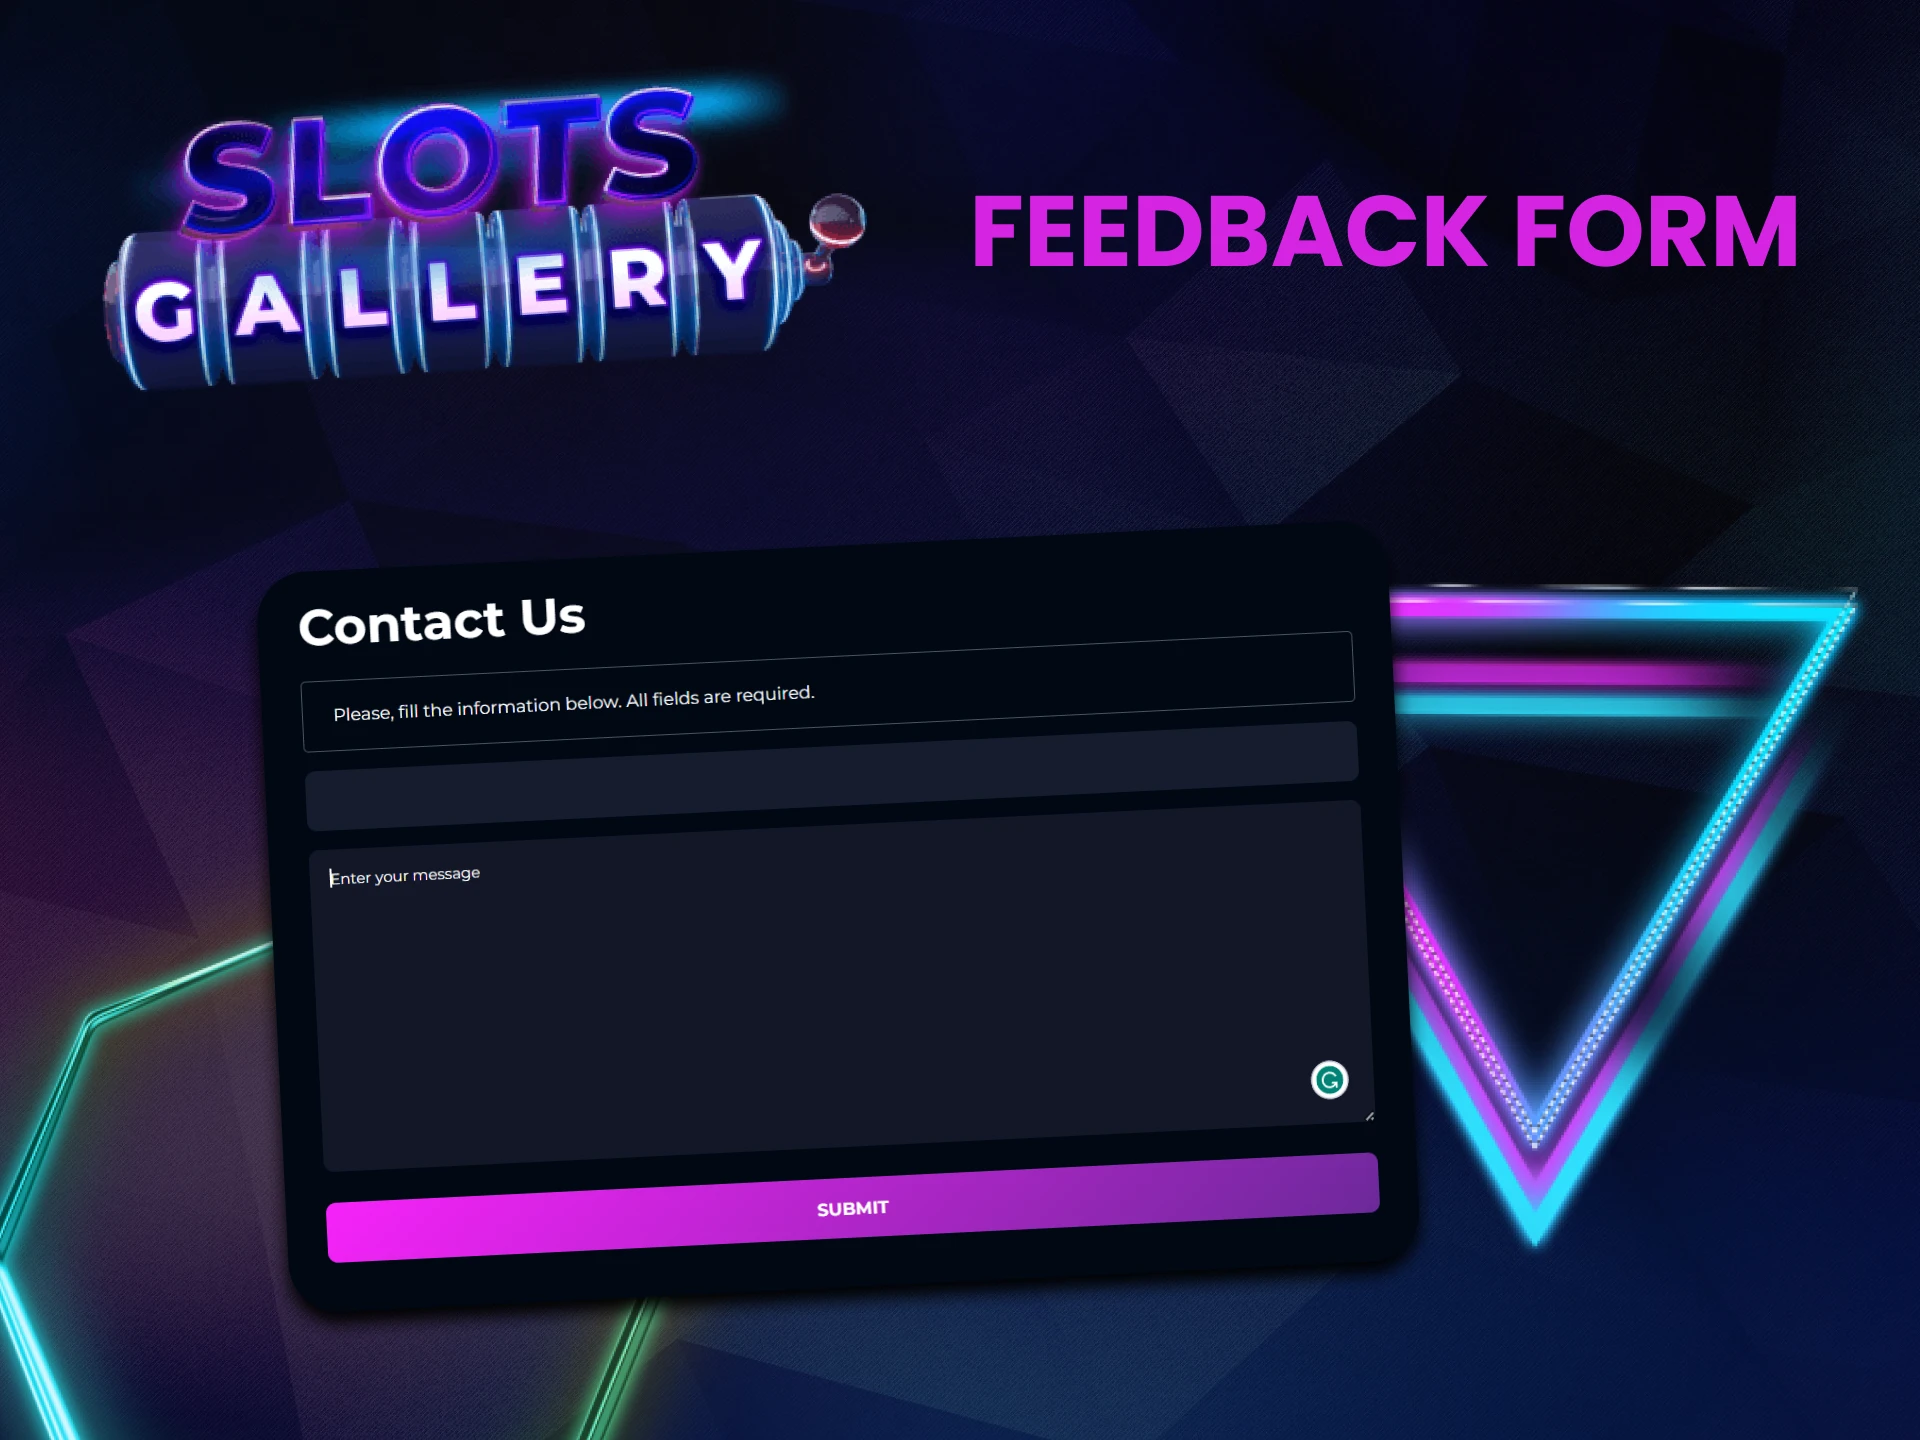 To contact the Slots Gallery team, use the feedback form.